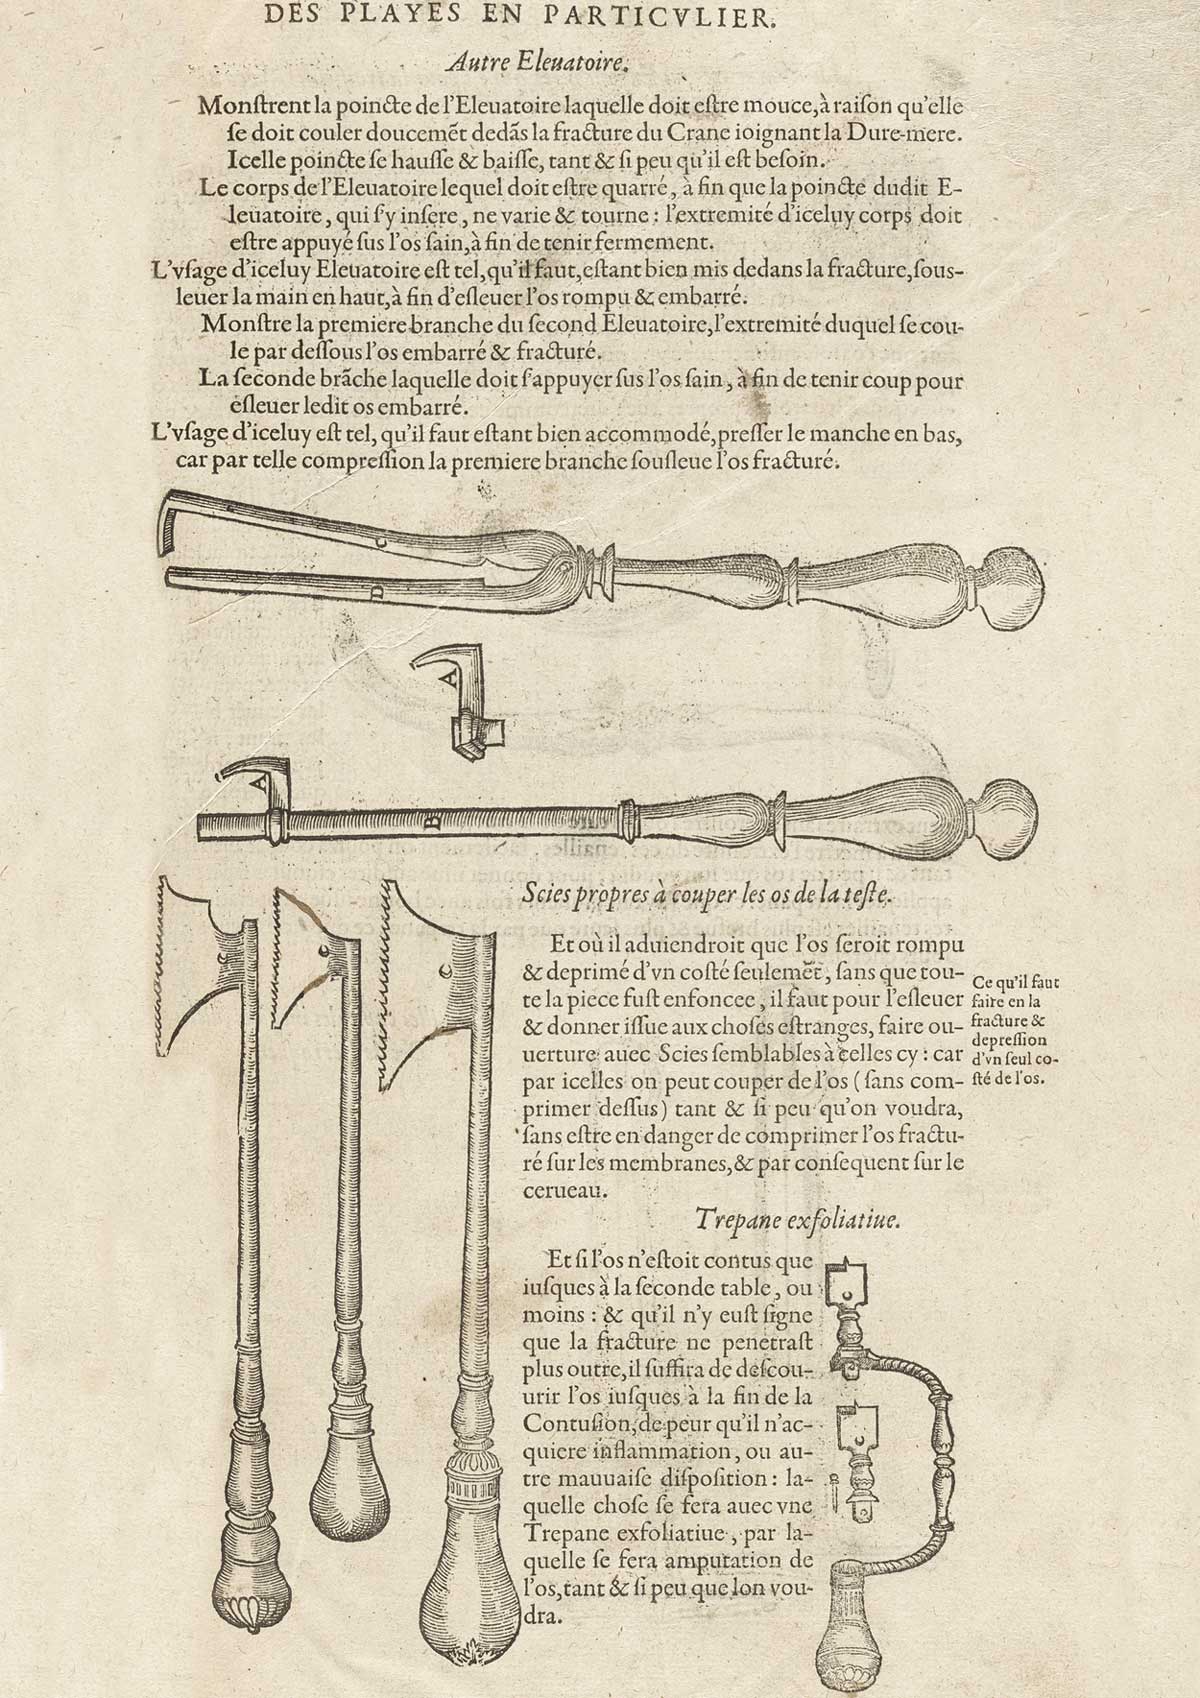 Page CCCLII which features elevators and bone saws with descriptive text.